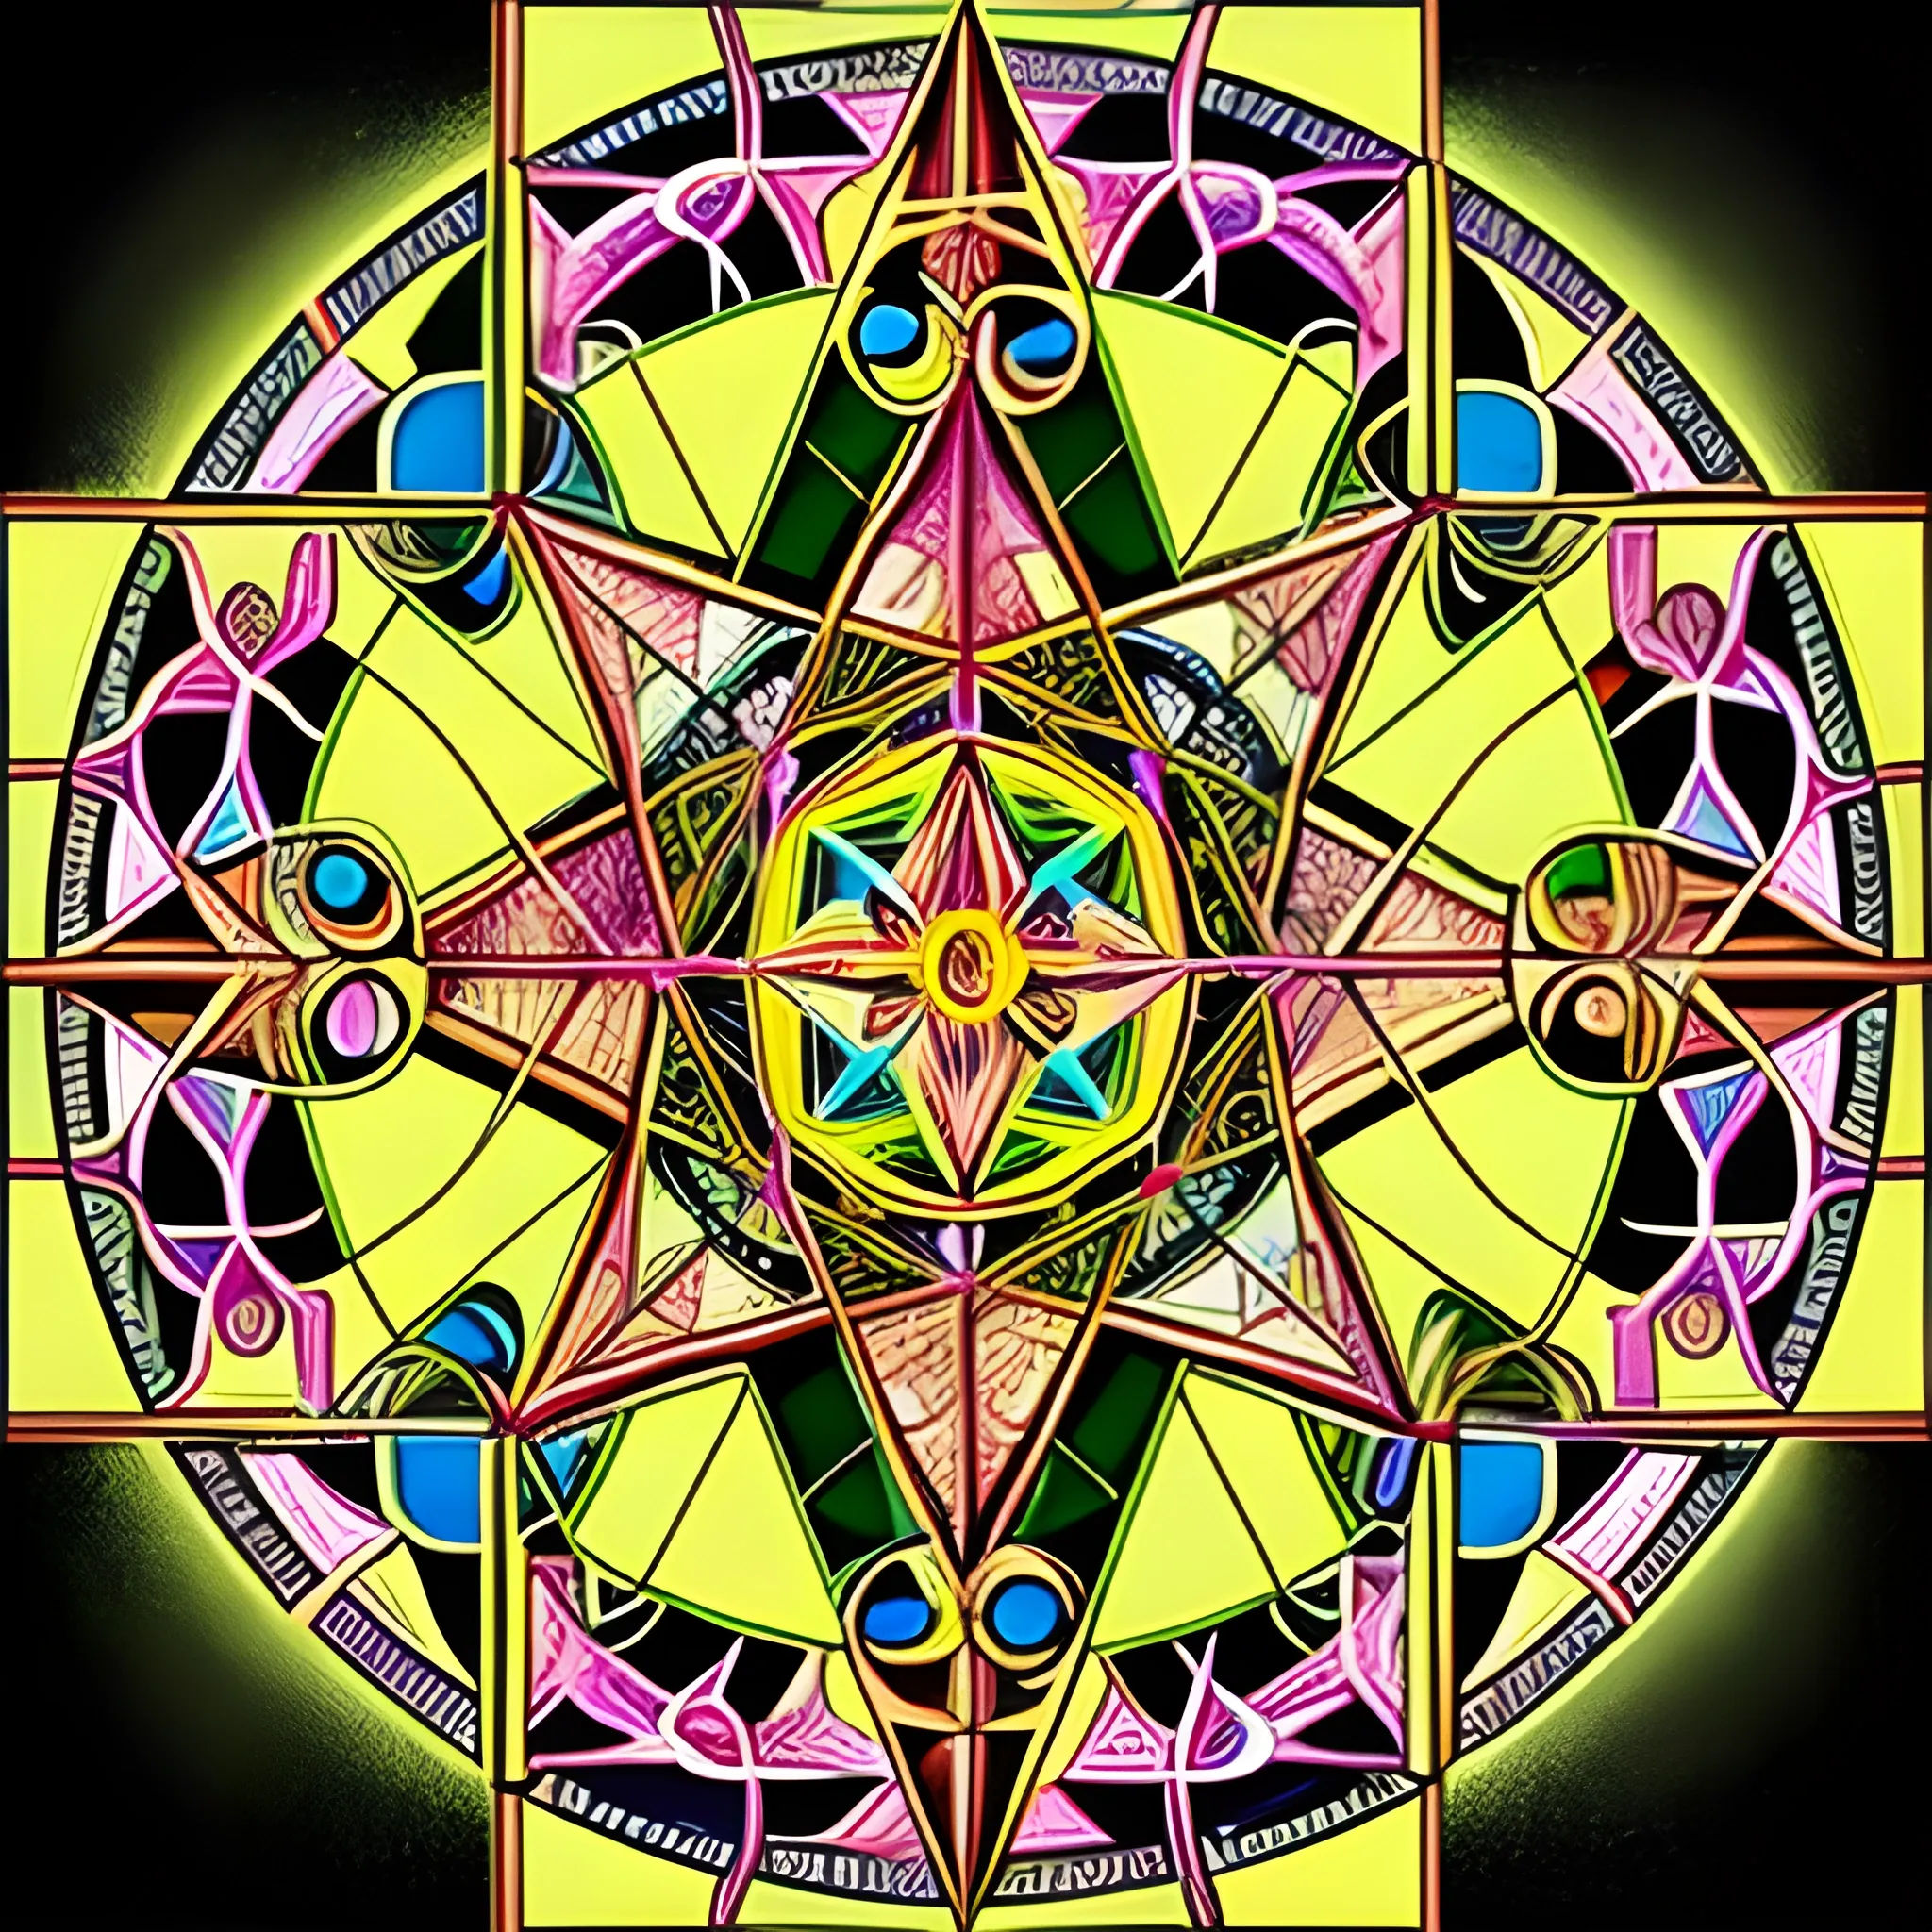 Jesus with SACRED GEOMETRY in the background

, Cartoon, 3D